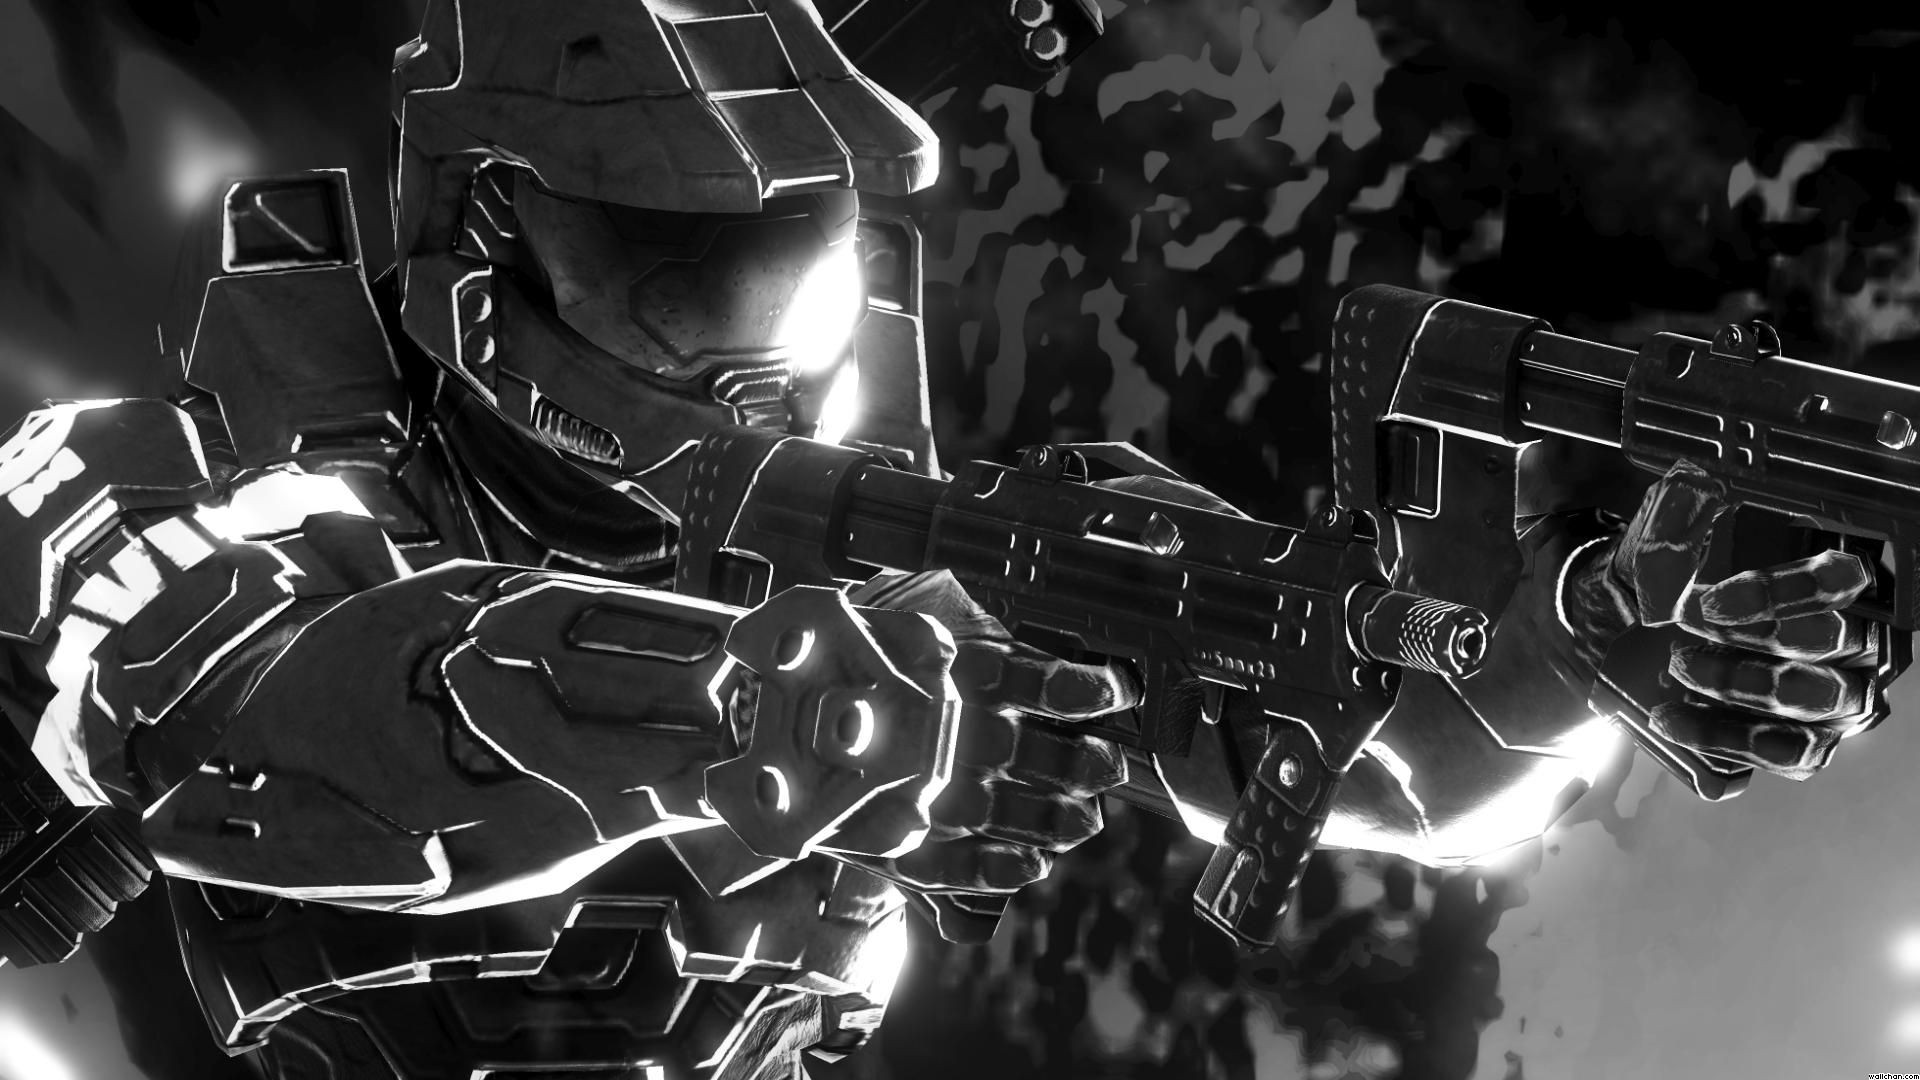 General 1920x1080 Halo (game) Halo: The Master Chief Collection Xbox One video games artwork monochrome video game art science fiction Master Chief (Halo)